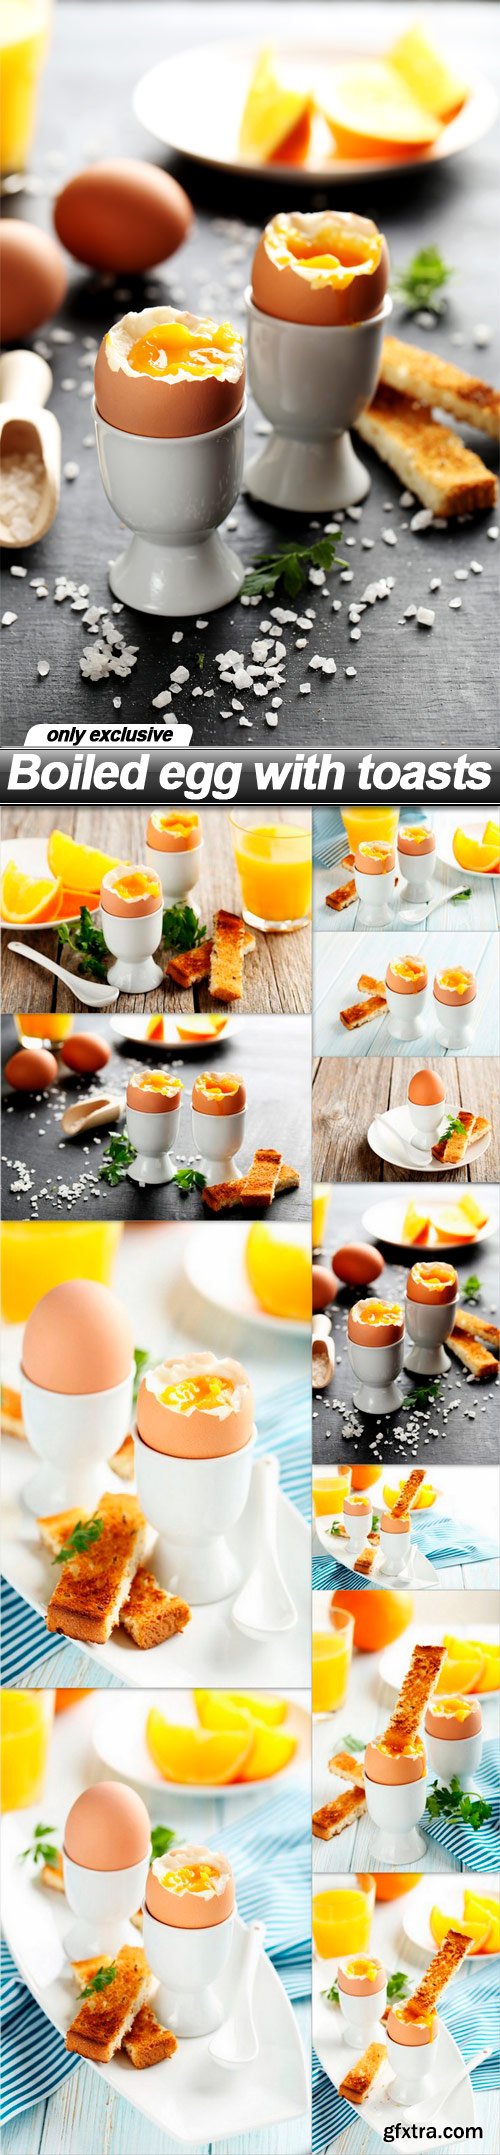 Boiled egg with toasts - 11 UHQ JPEG